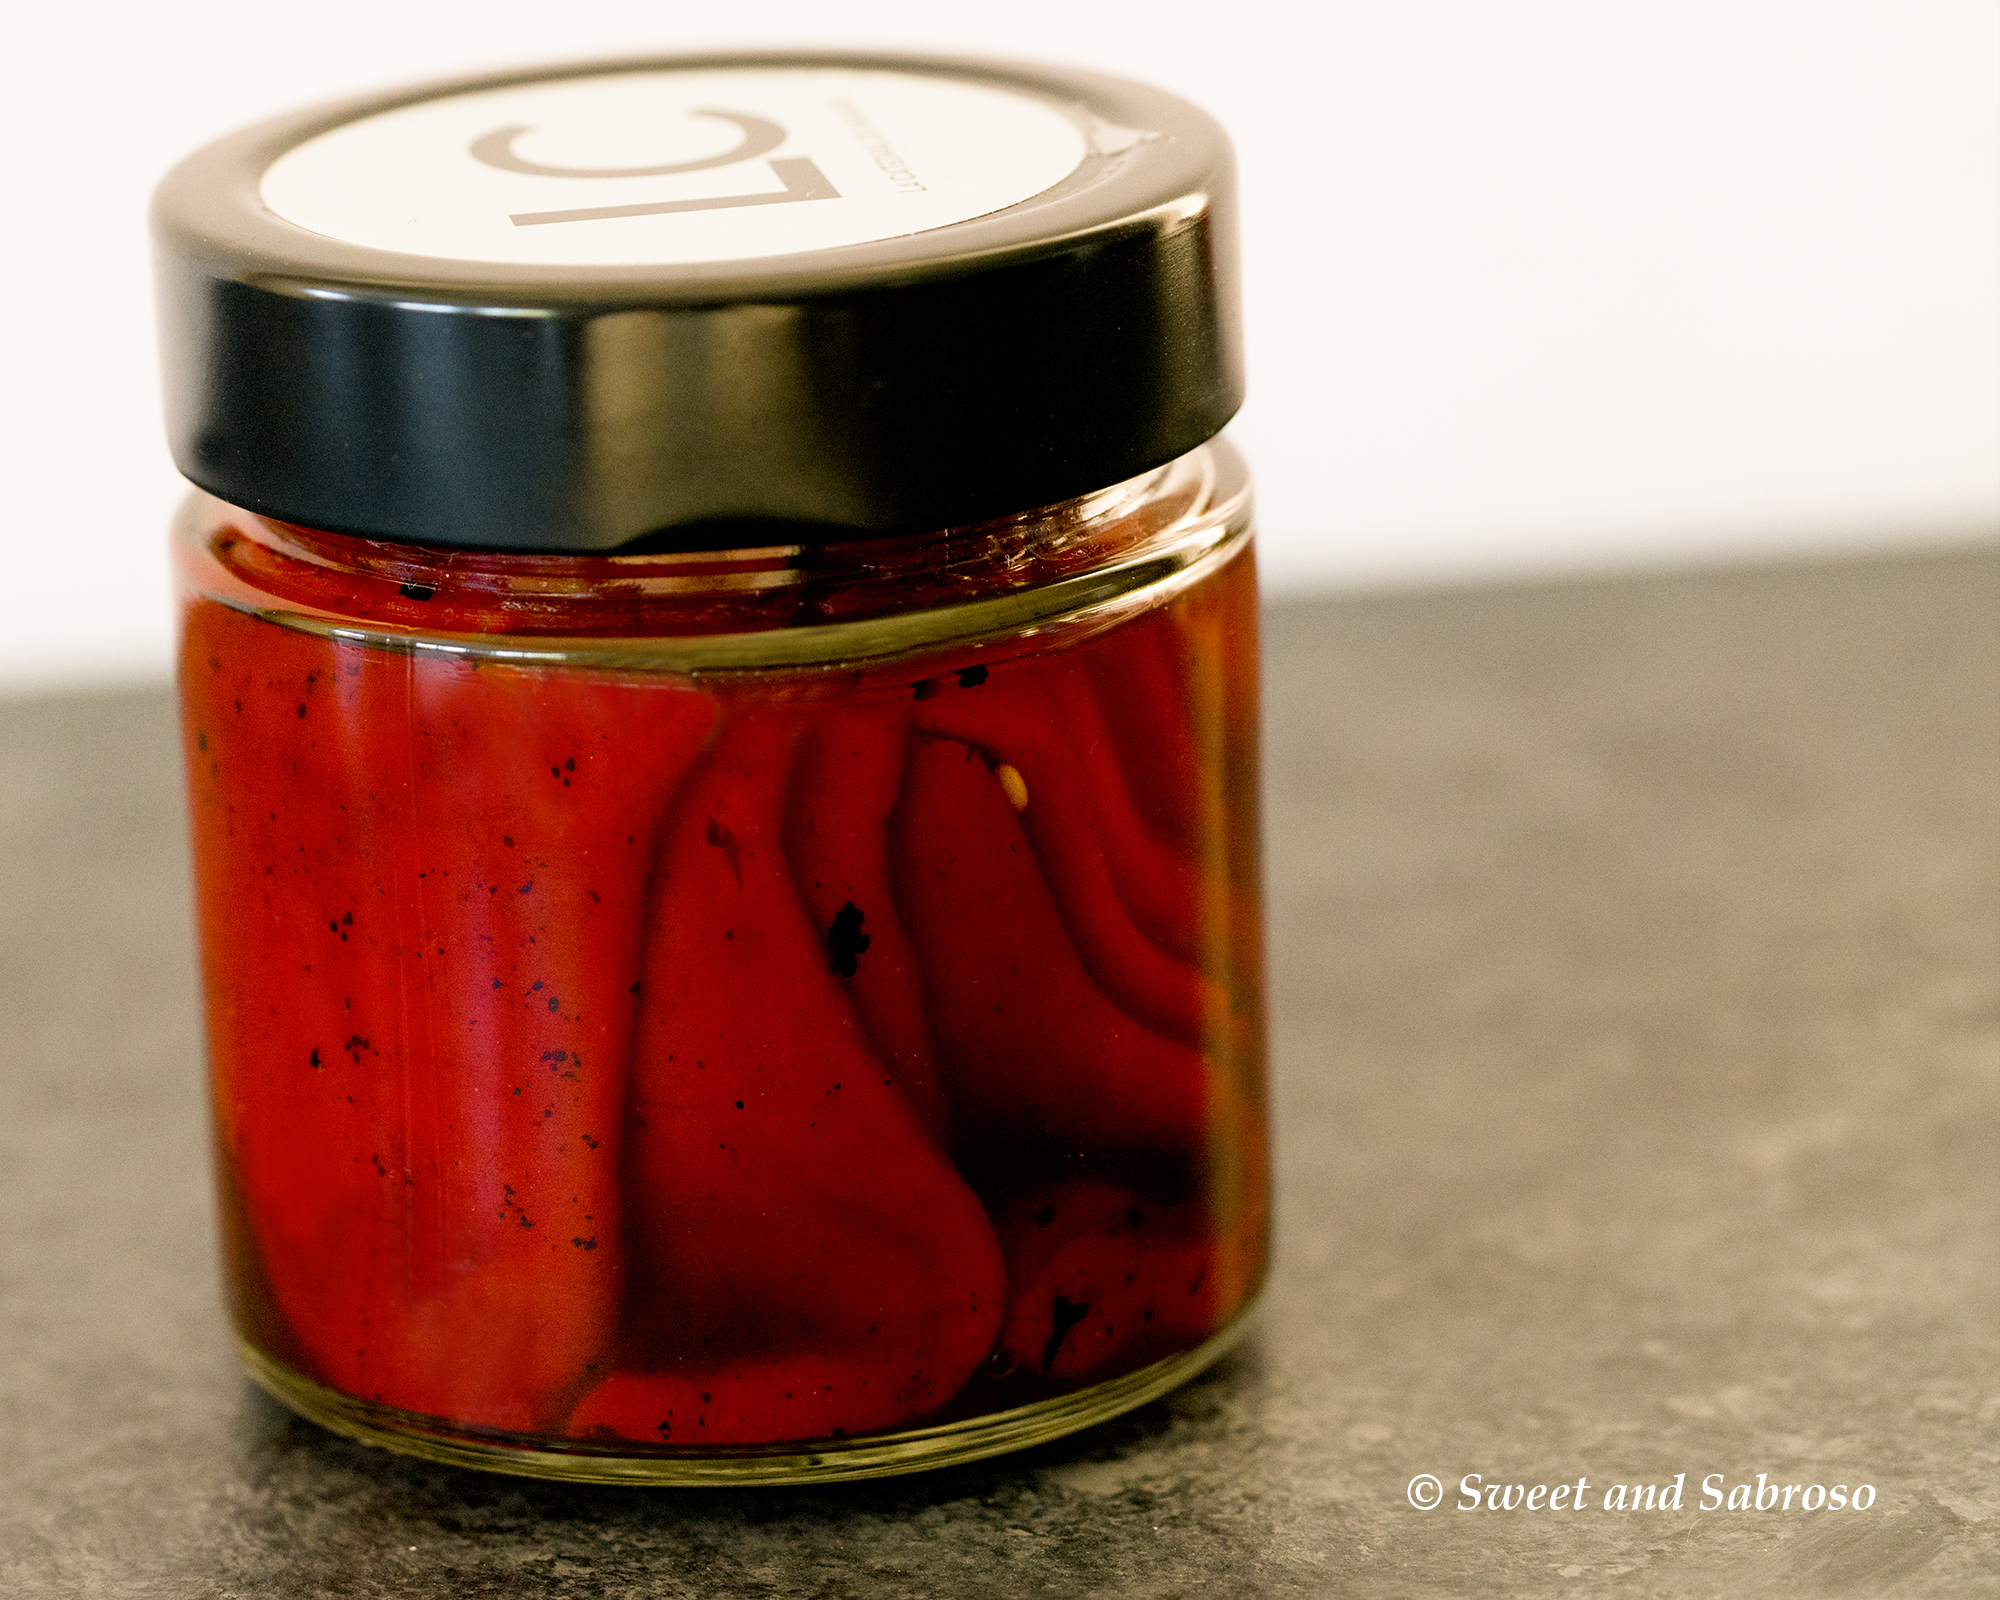 Piquillo Peppers in a Jar from Spain